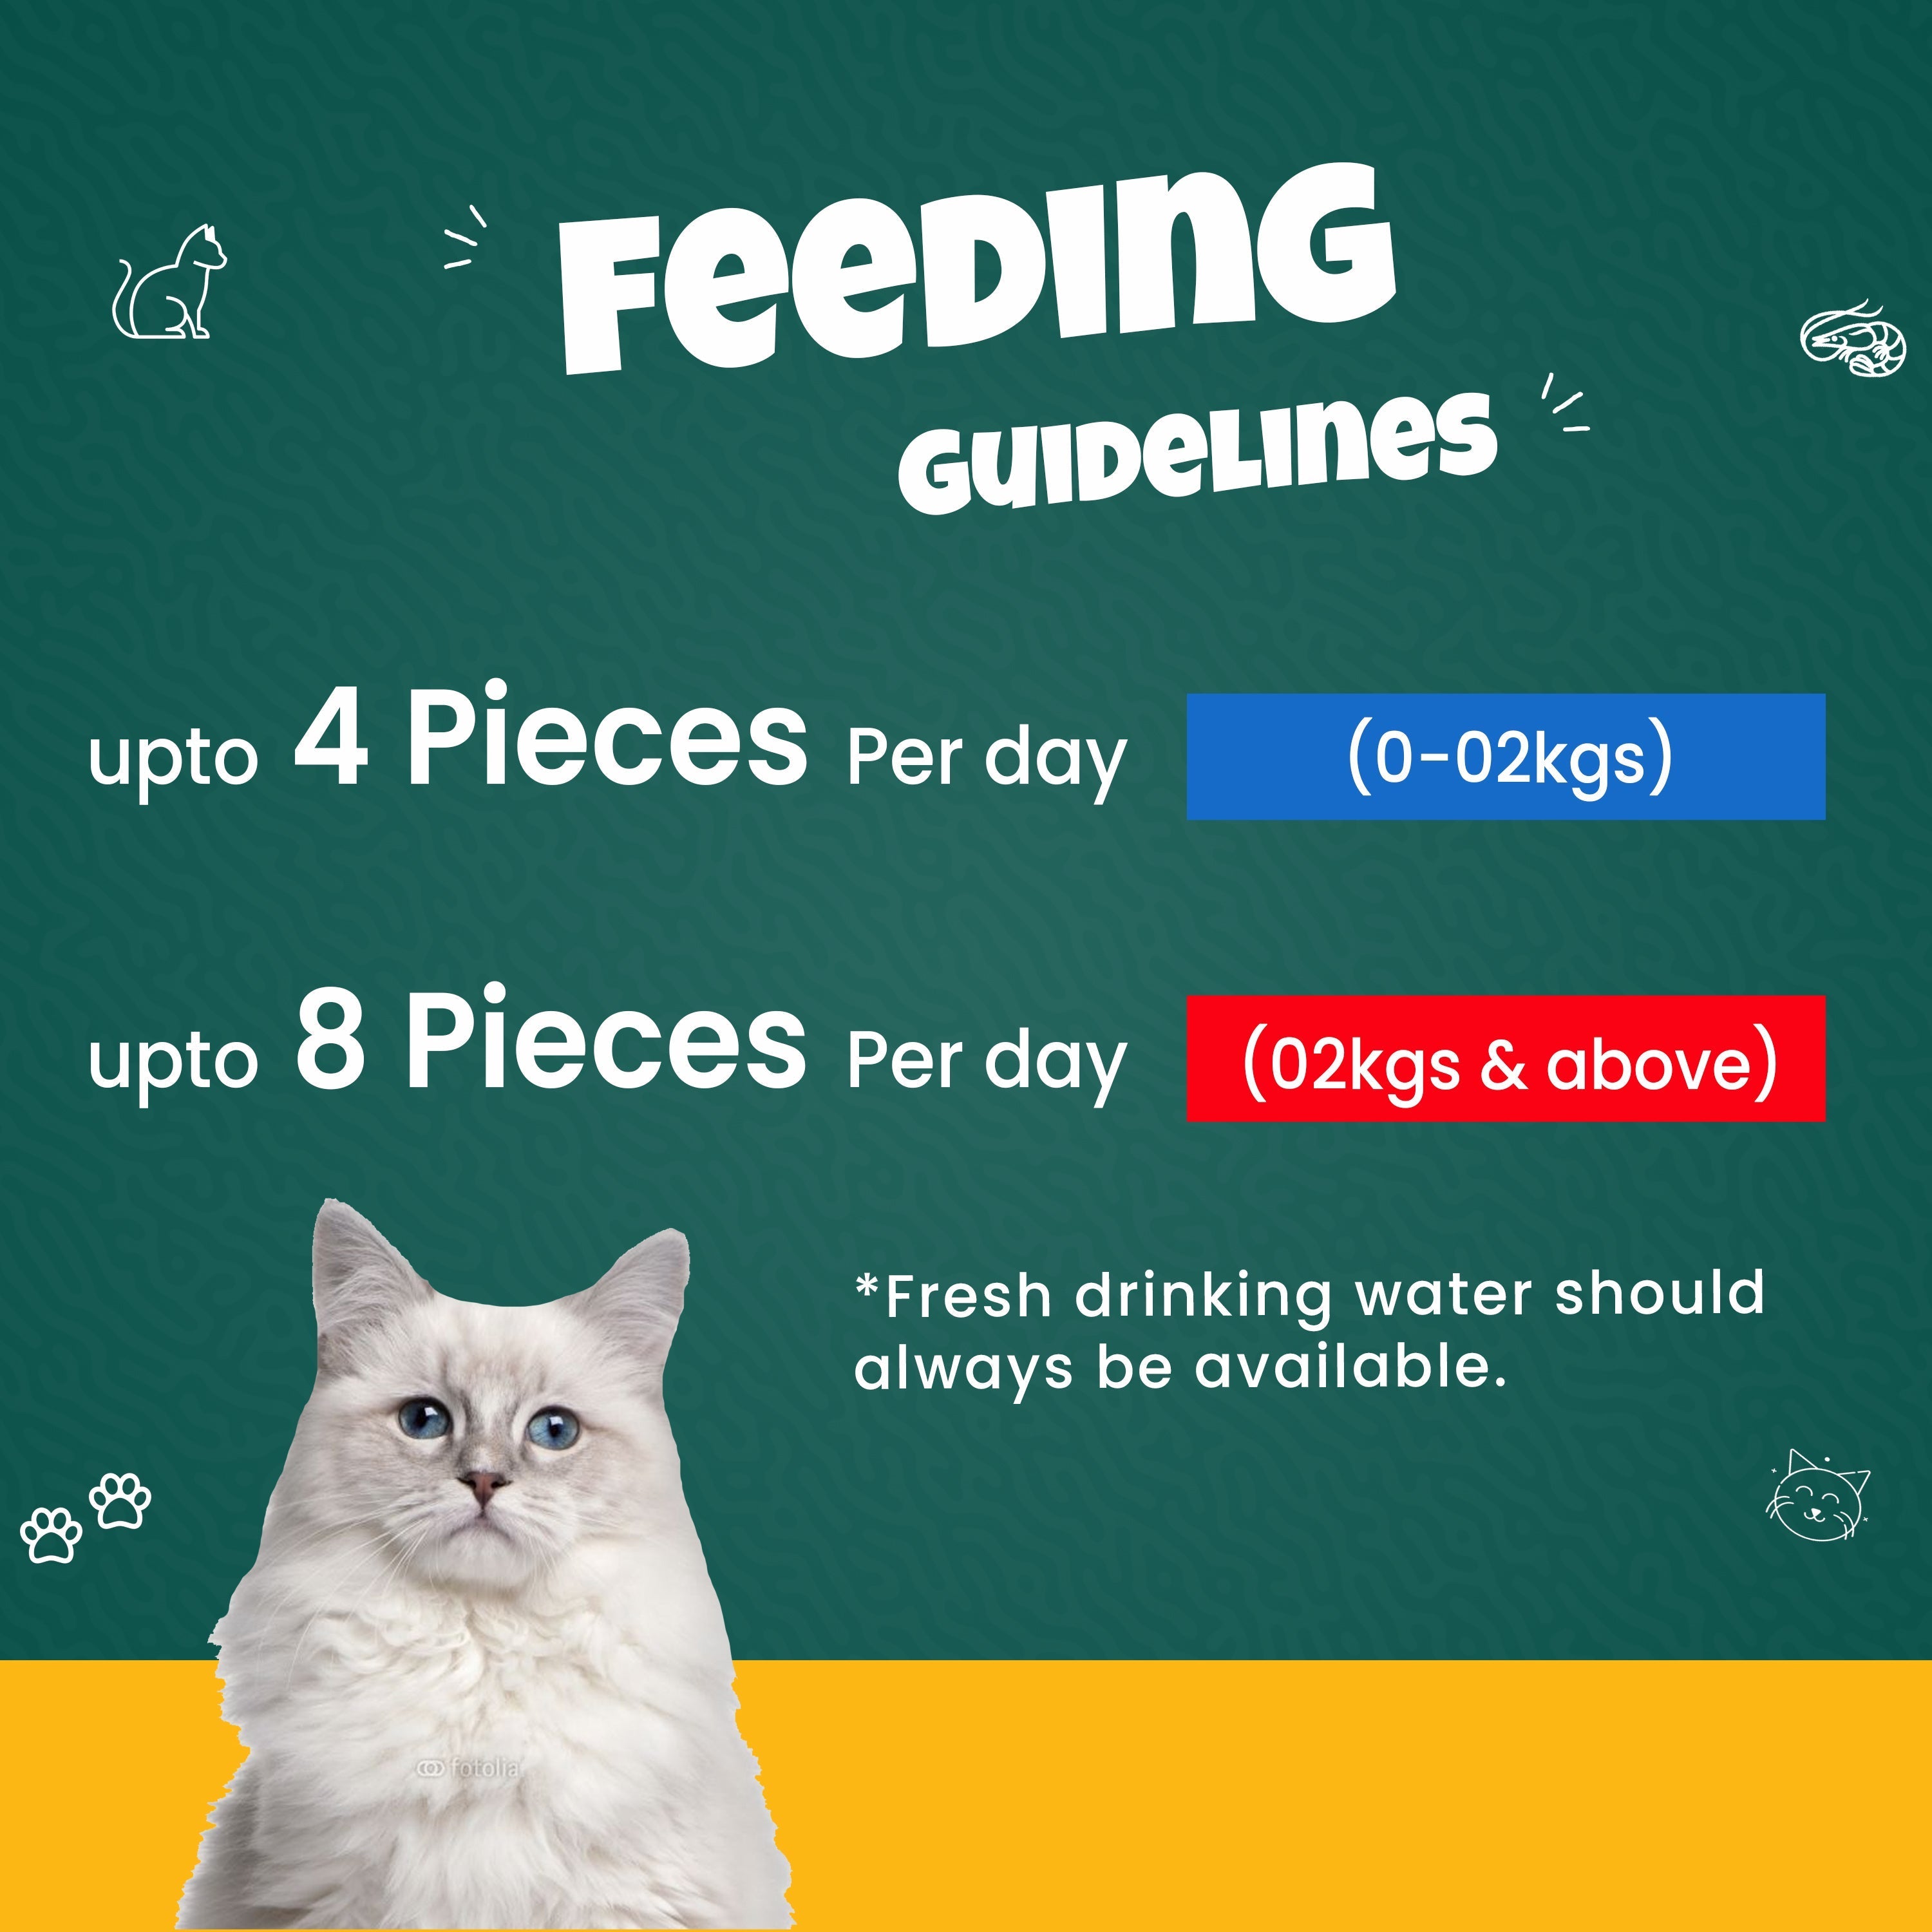 Freeze Dried Shrimp Feeding Guide Foe cats and kittens from goofy tails.com